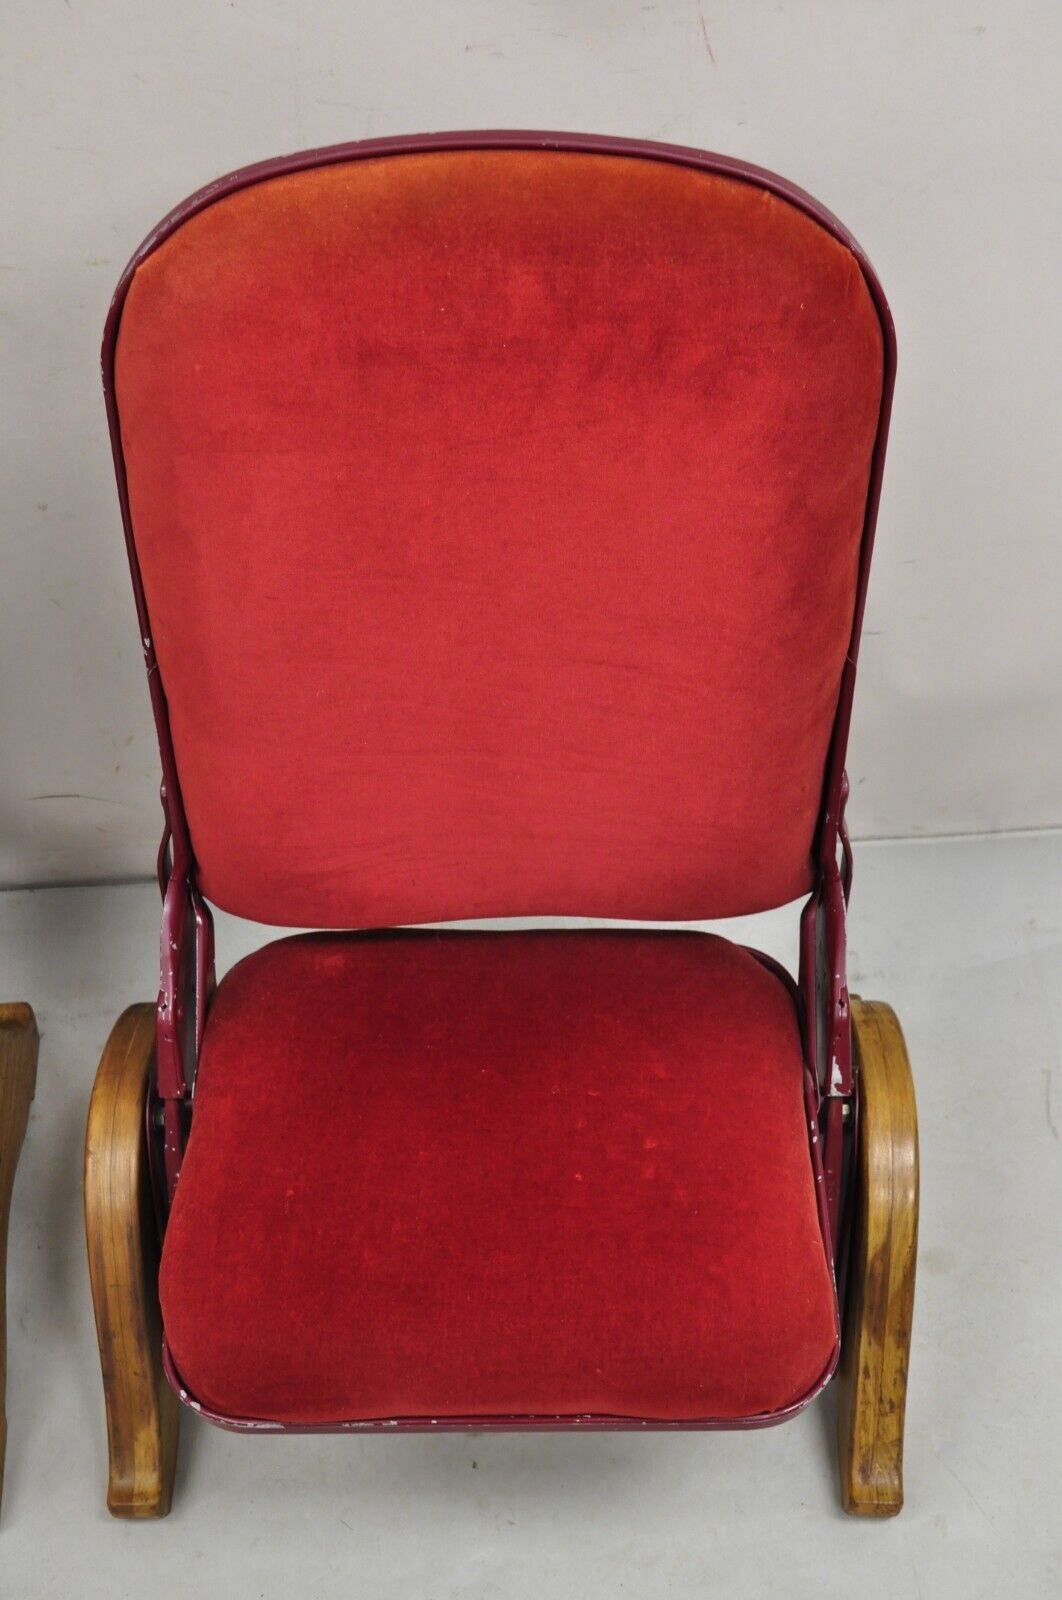 Vintage Art Deco Style Fold and Recline Red Low Theater Seats Chairs - a Pair